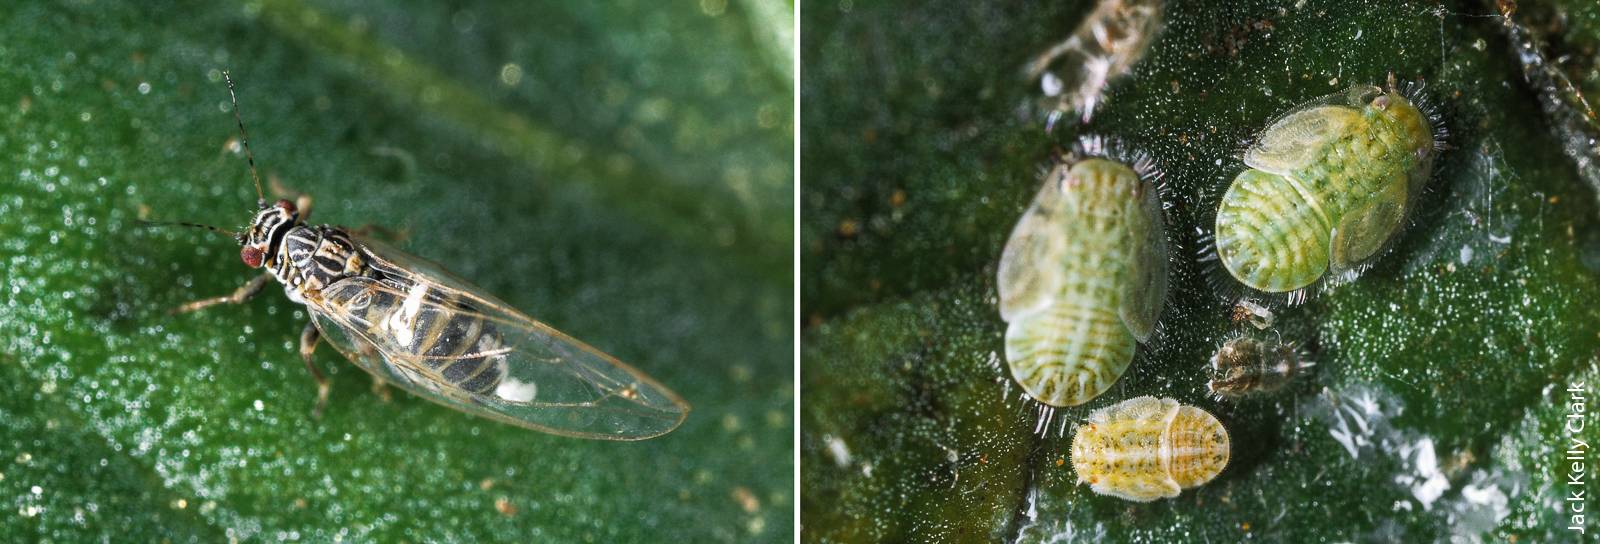 Psyllid adult, left, and psyllid nymphs, right. Adult potato psyllids are cicadalike in appearance. Although feeding by adults usually does not damage potato plants, their presence indicates a need to check for nymphs. Potato psyllid nymphs have a flattened, scalelike appearance.